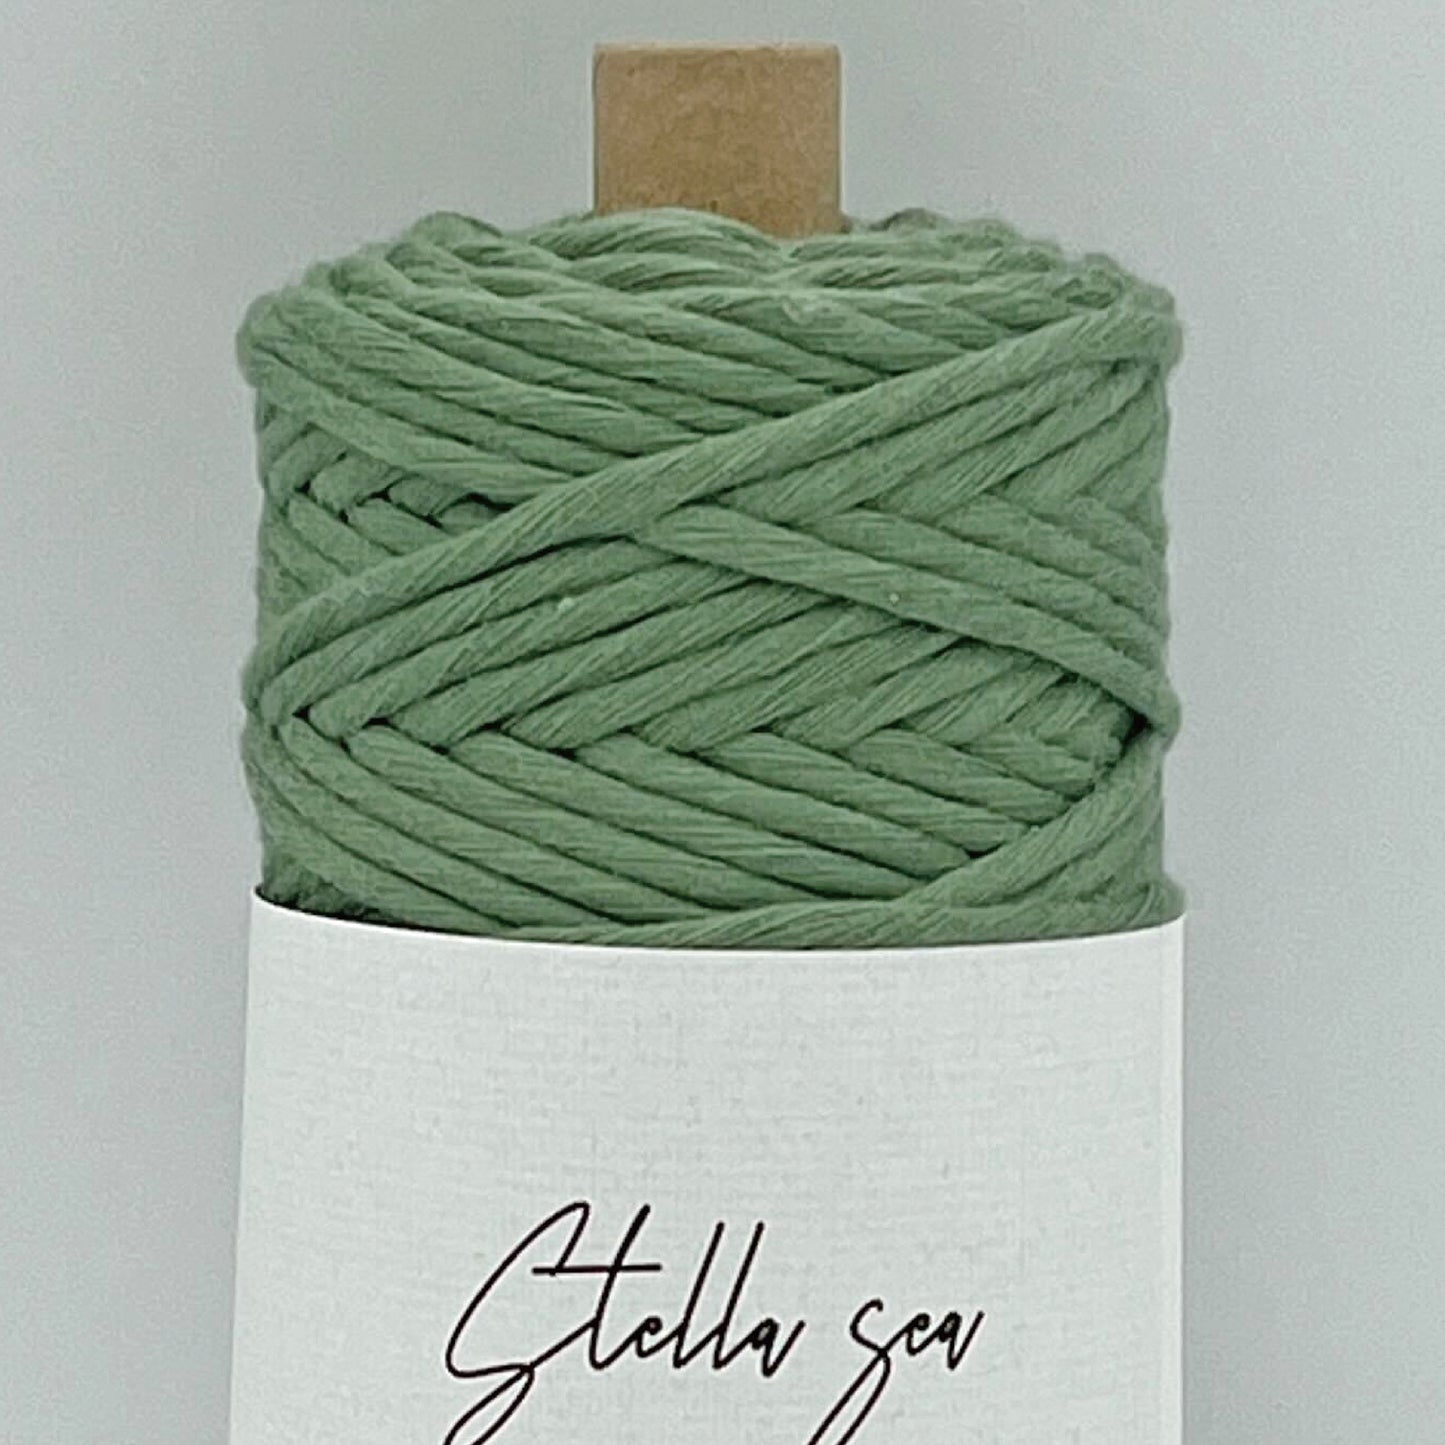 3.5mm/Color/50m (about 125g) Single-Strand fair trade organic cotton macrame color cord made in Japan